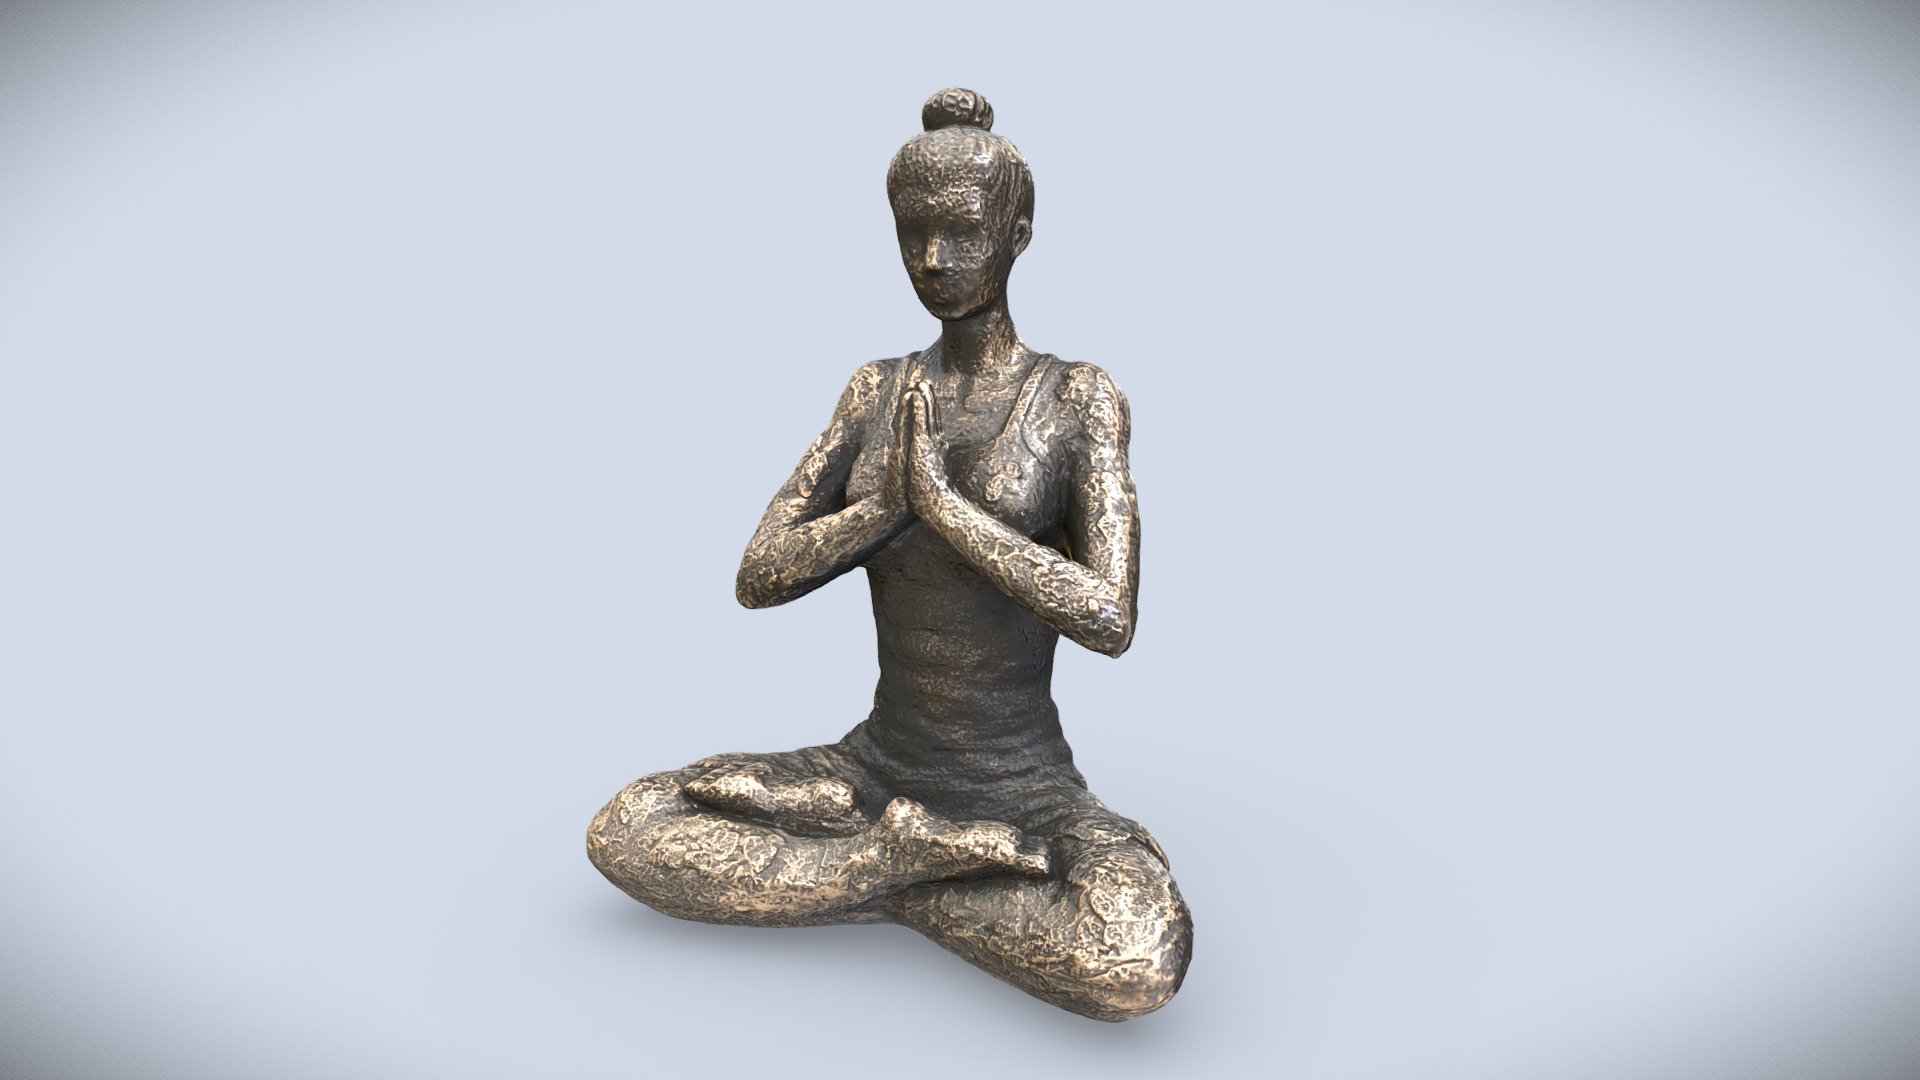 Scan of a golden bronze yoga pose figurine. This decorative figure is sitting in a lotus pose with arms in a prayer pose at the chest level.
Images of this prop were taken in a neutral lighting environment which does not produce hard shadows - feel free to spin the light around to see how it reacts to the light.

8K diffuse, spec and ambient occlusion textures.

Hope you like it!

Another yoga figurine with an alternative pose &ldquo;Lotus Arms Up